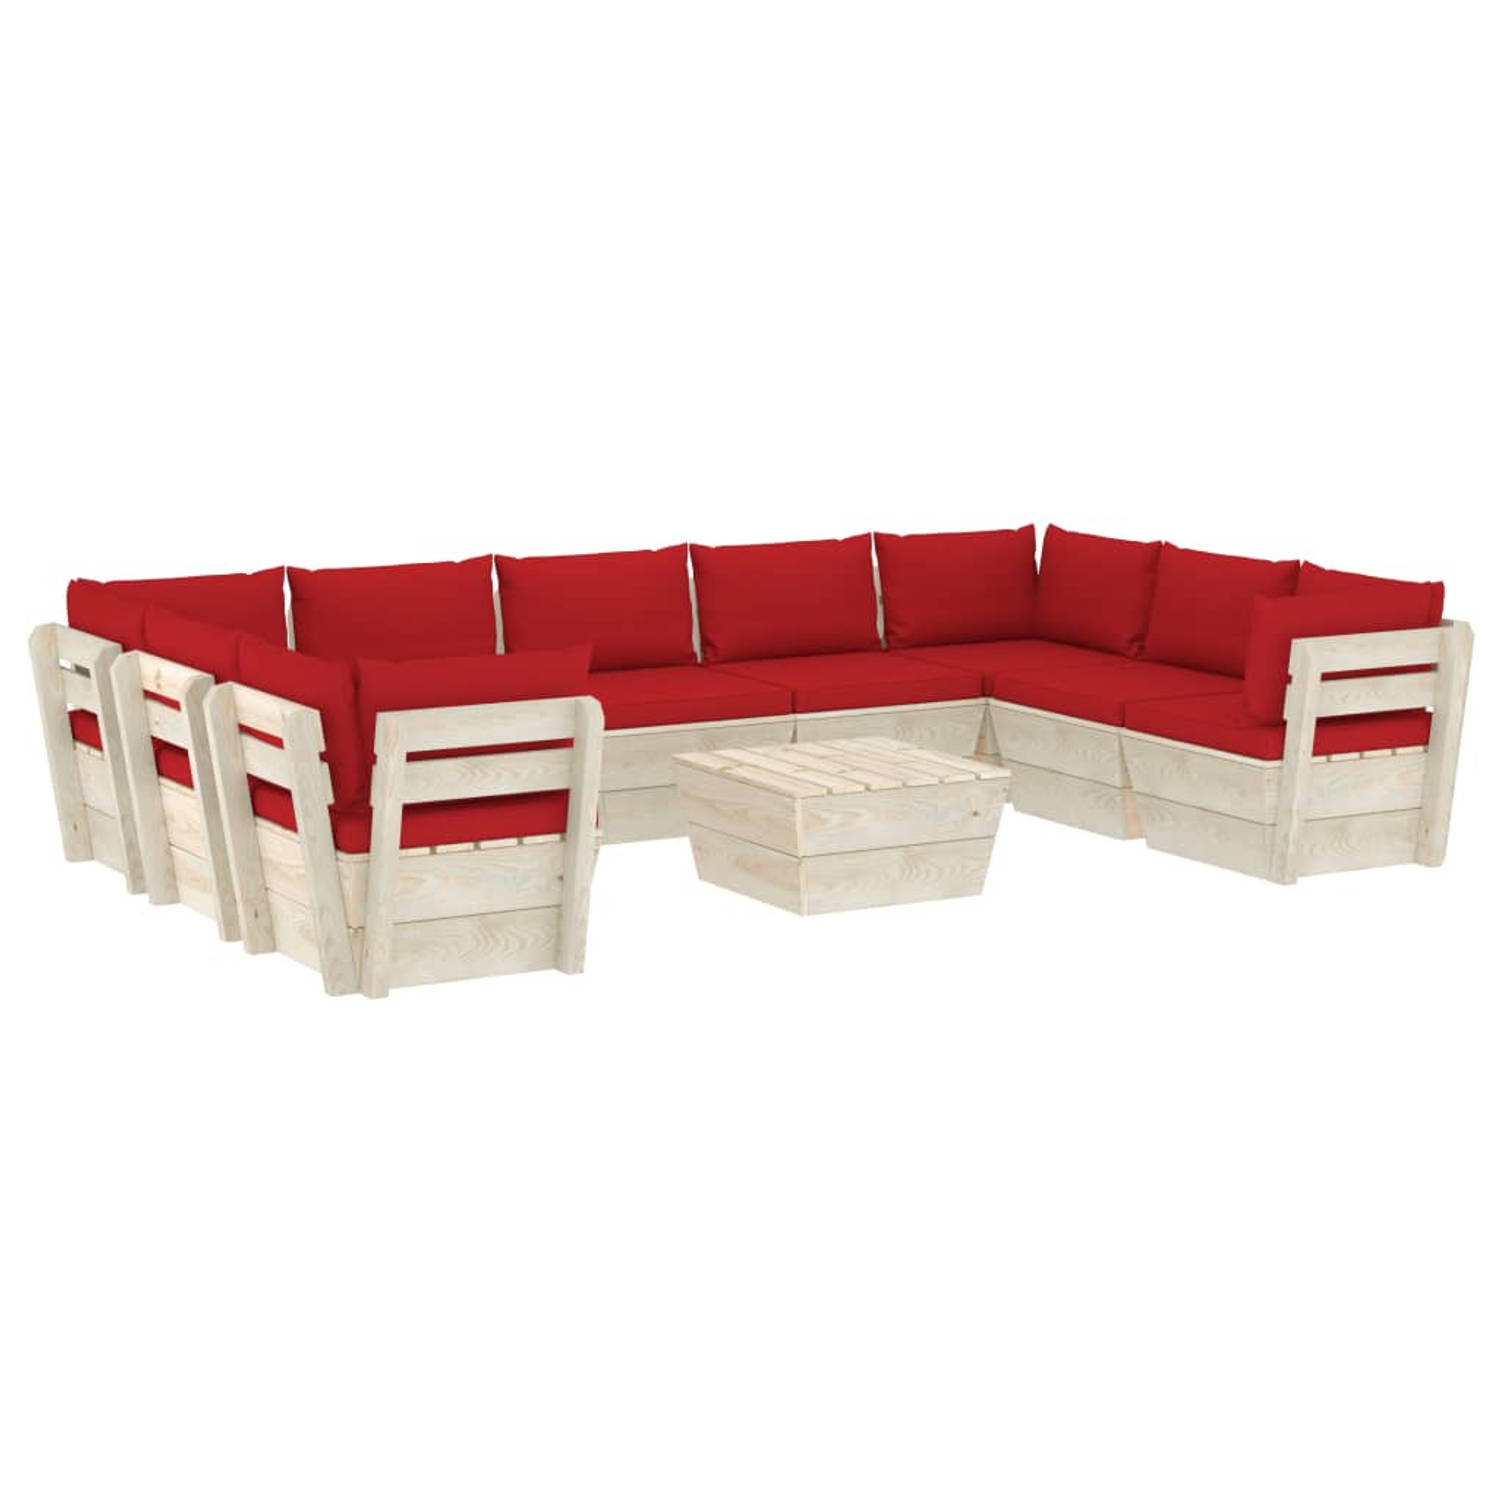 The Living Store Houten Loungeset - 10-delige - Pallet Tuinset - 60x60x65 cm - Rood